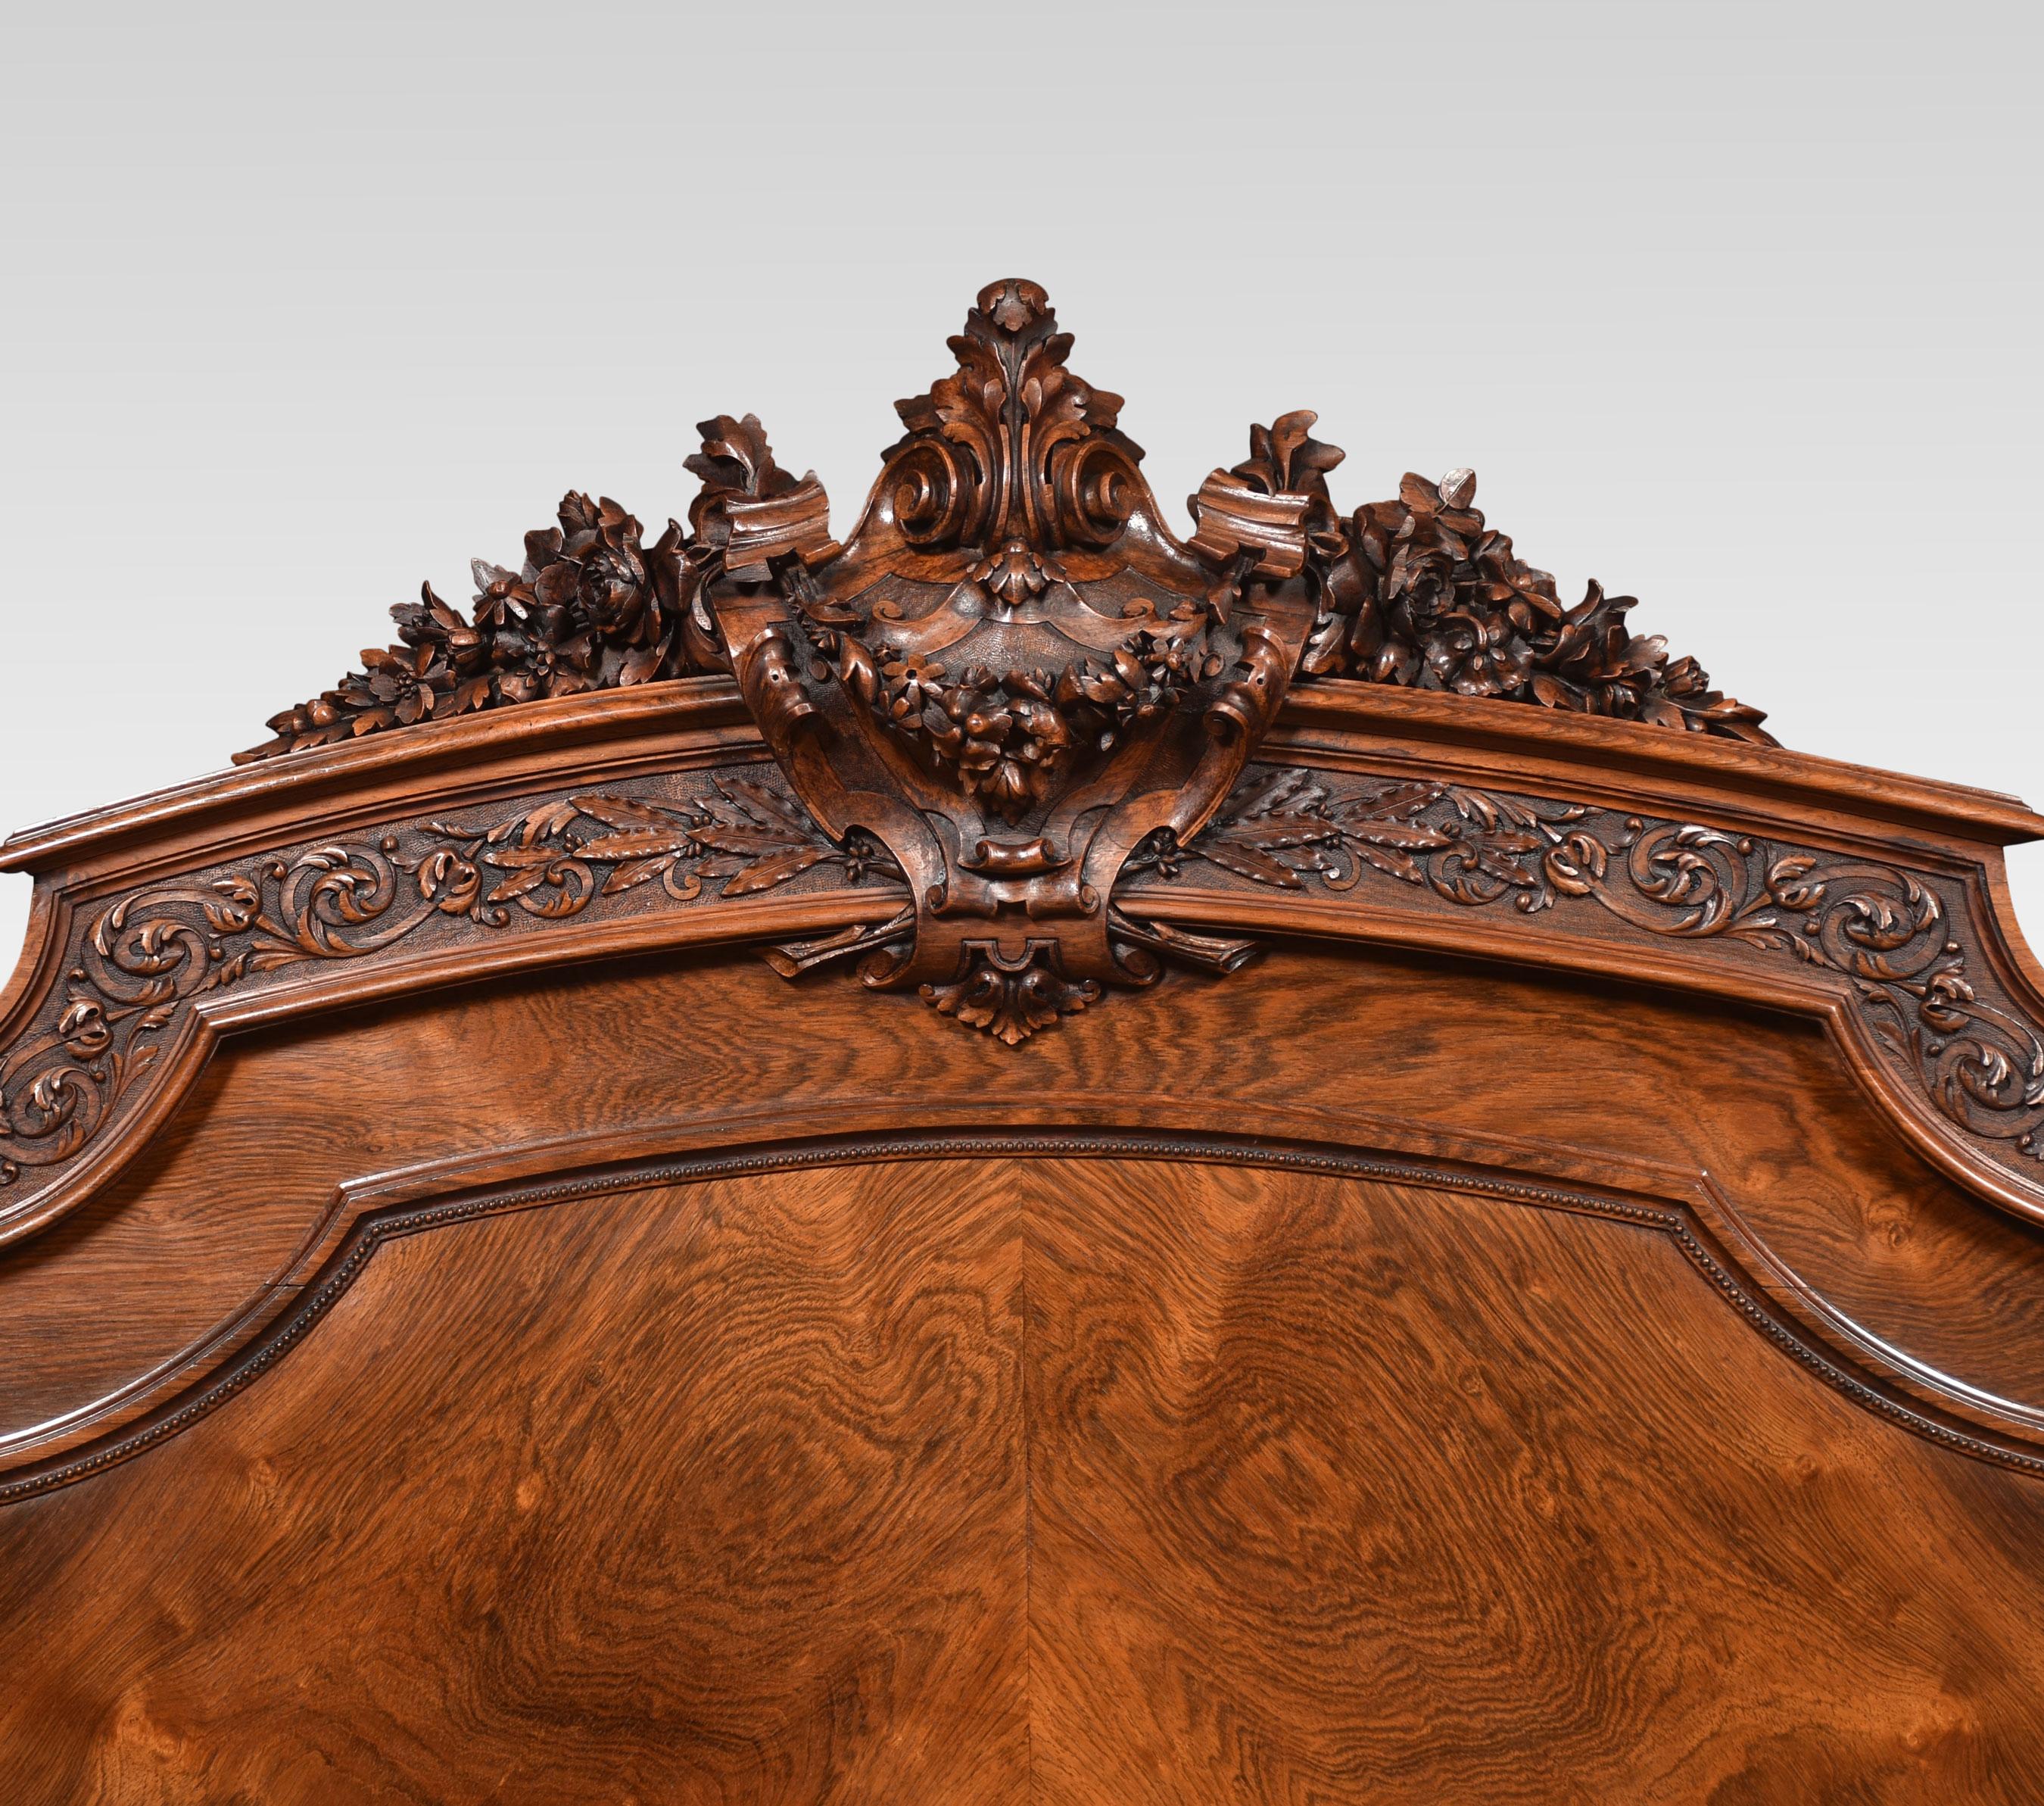 French-style walnut and rosewood double bed the ornately carved headboard flanked by reeded columns with urn capitals. To the side rails with scrolling and swag detail. The footboard with exceptional central carved panels flanked by reeded columns